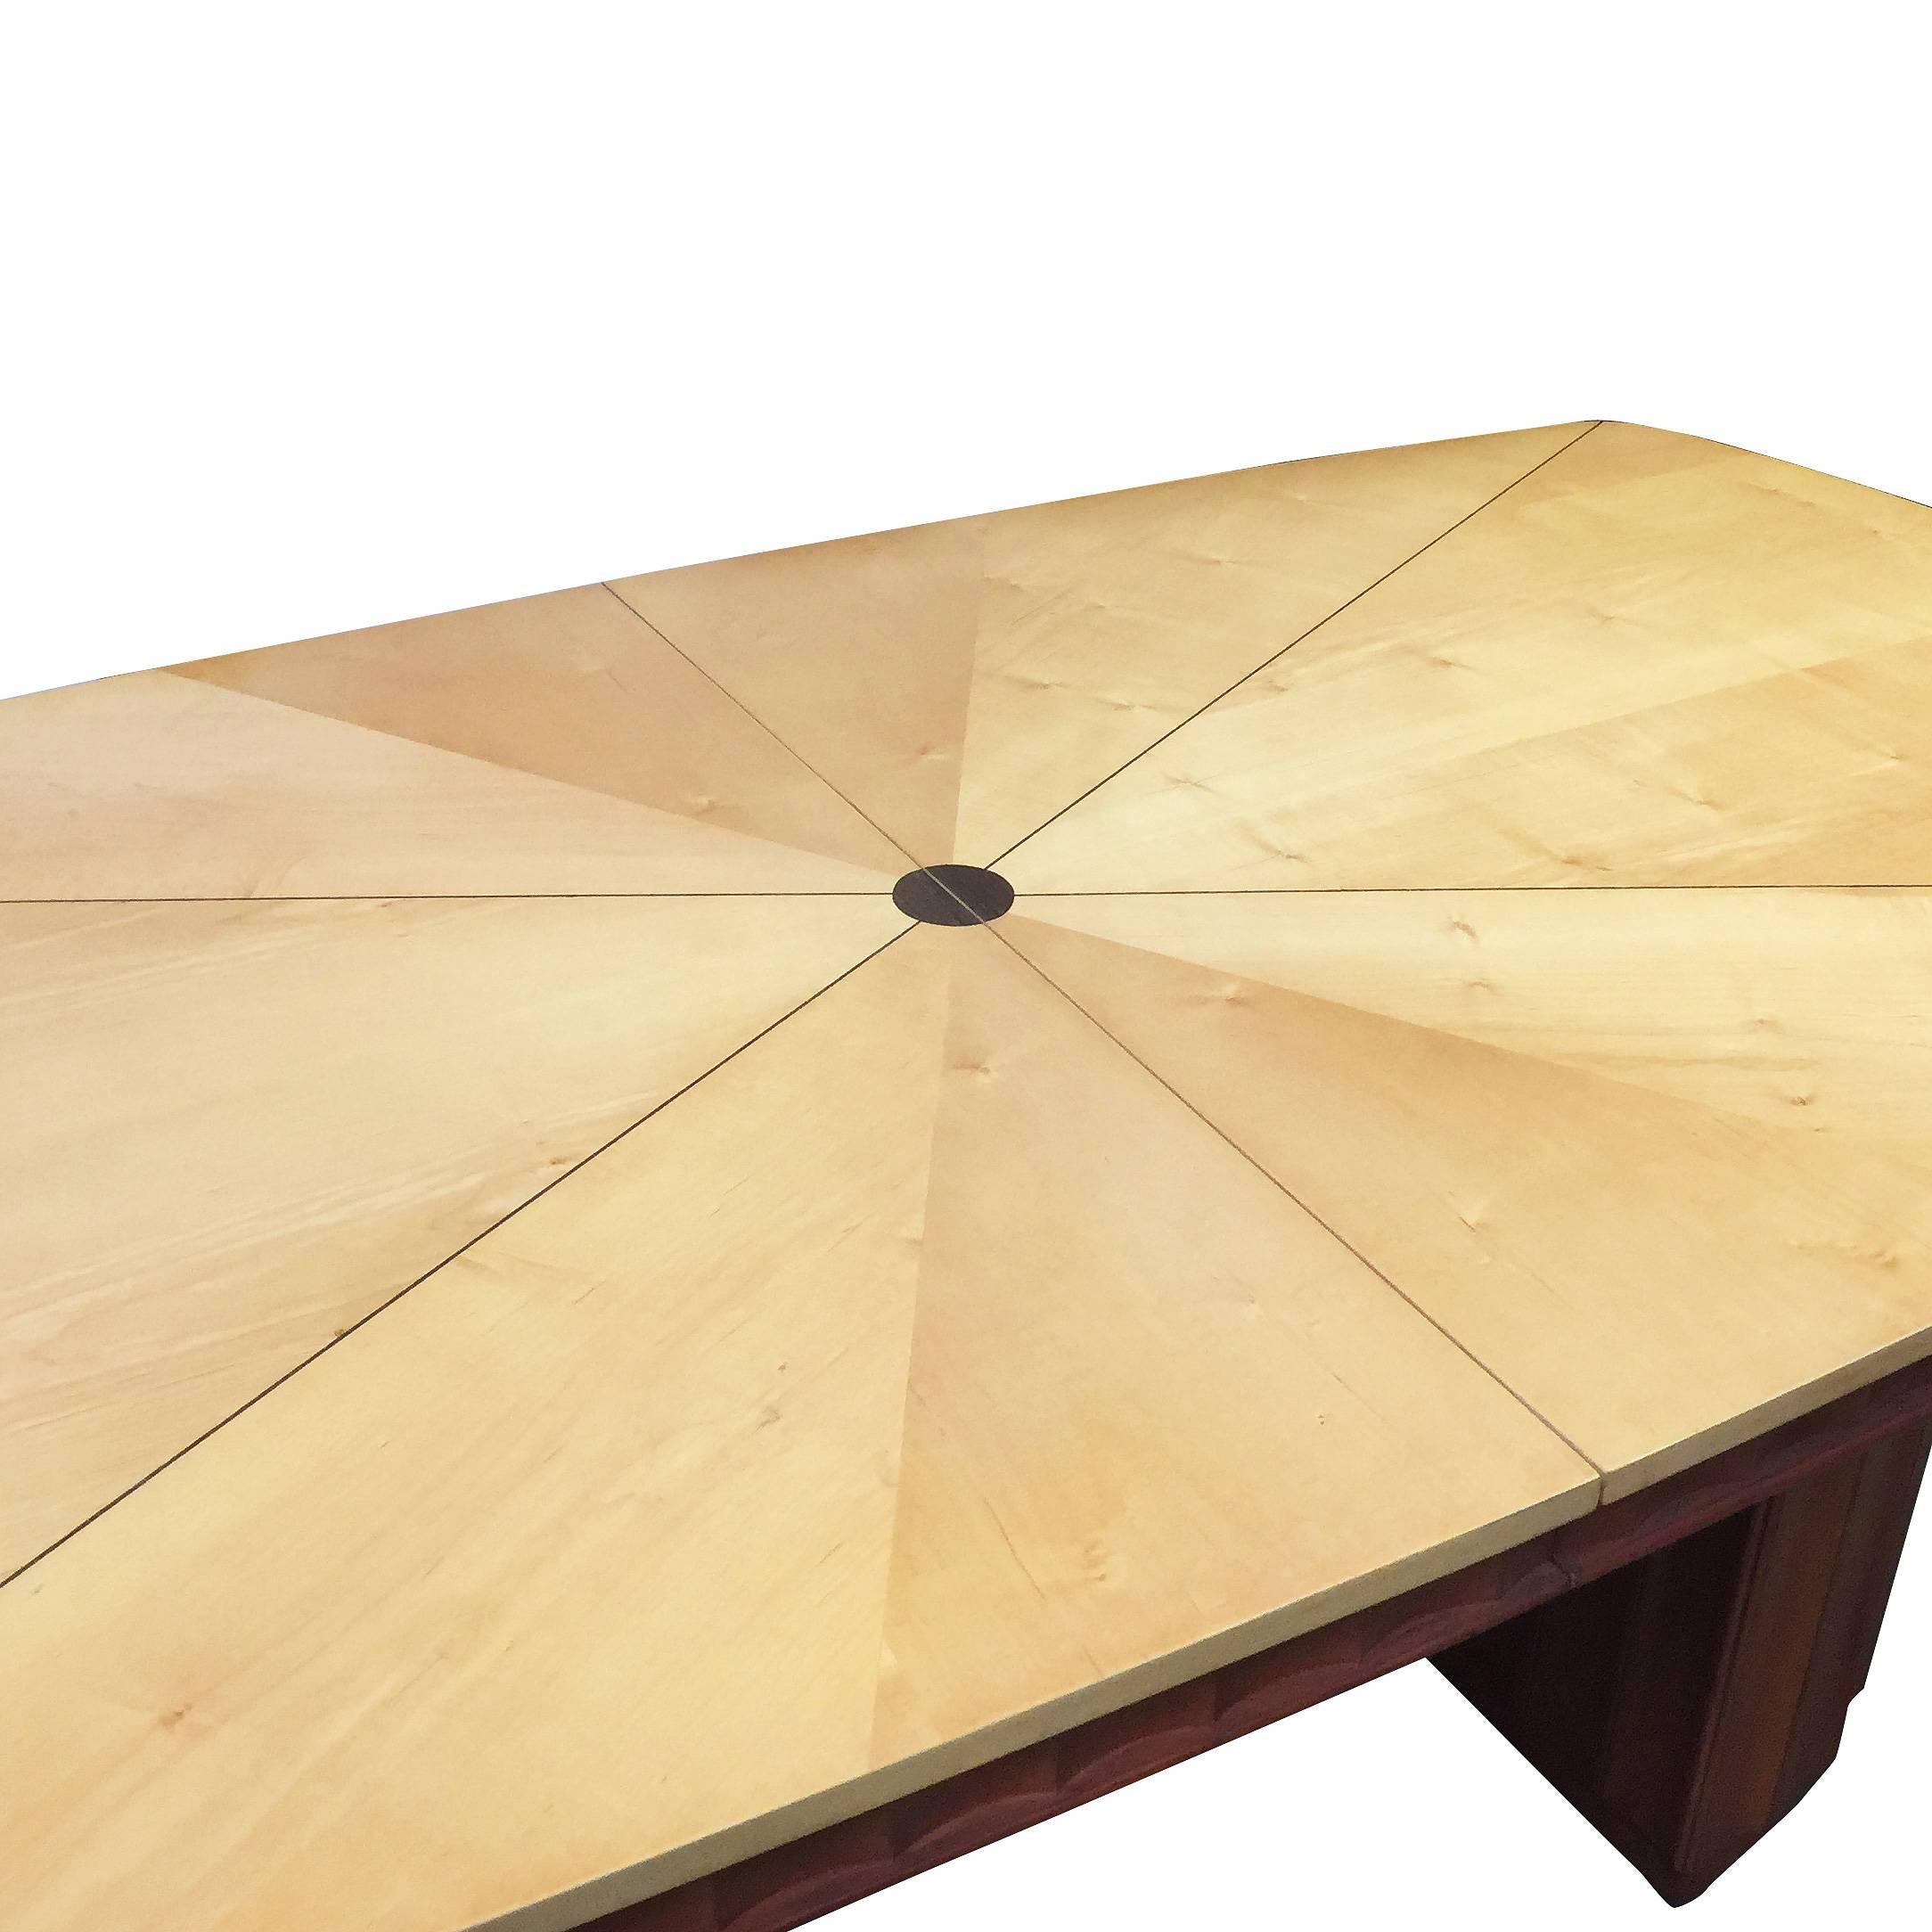 Rare two-tone French Art Deco dining room table with sculpted bases in the style of Eliel Saarinen. The tabletop features a inlay tabletop with dark walnut in strips on a blond surface. 

The top comes with an leaf to expand the table, leaf is